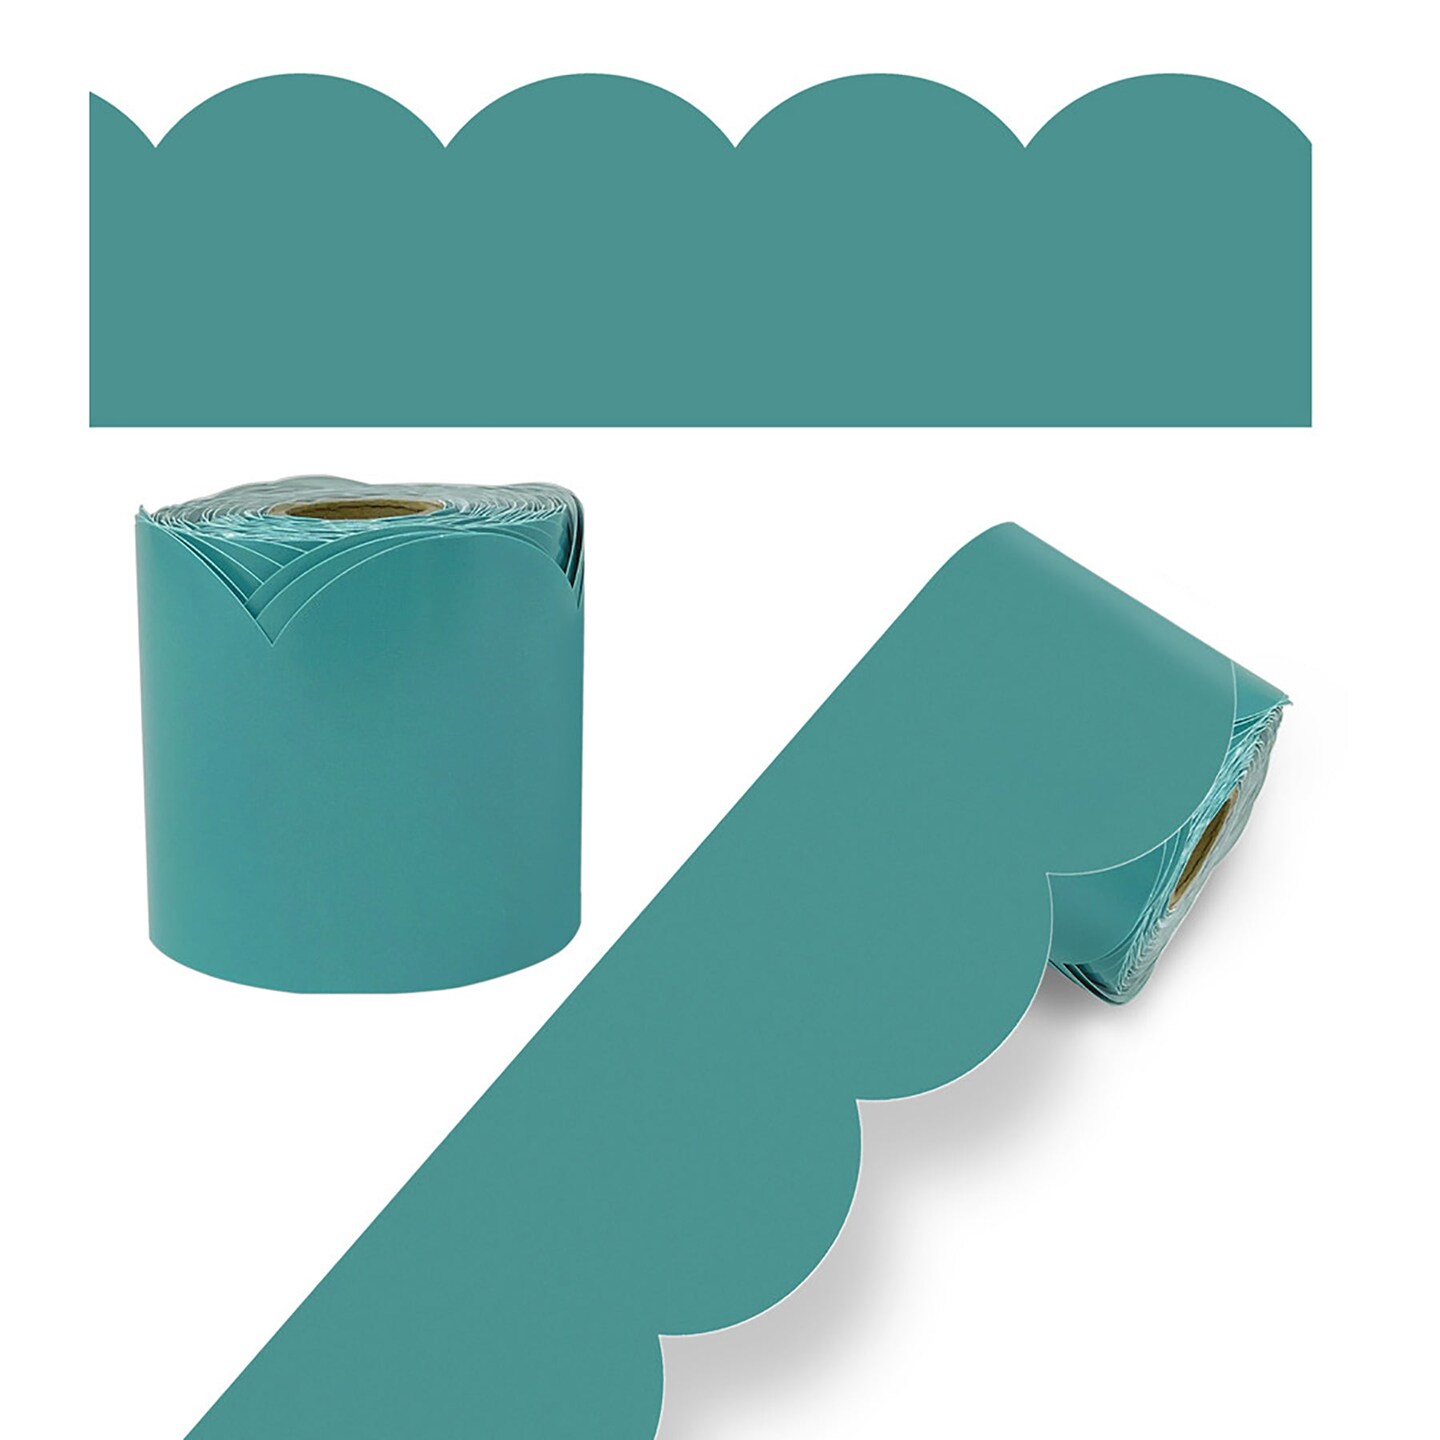 We Belong Teal Rolled Scalloped Bulletin Board Borders, 65 Feet Per Roll, Pack of 3